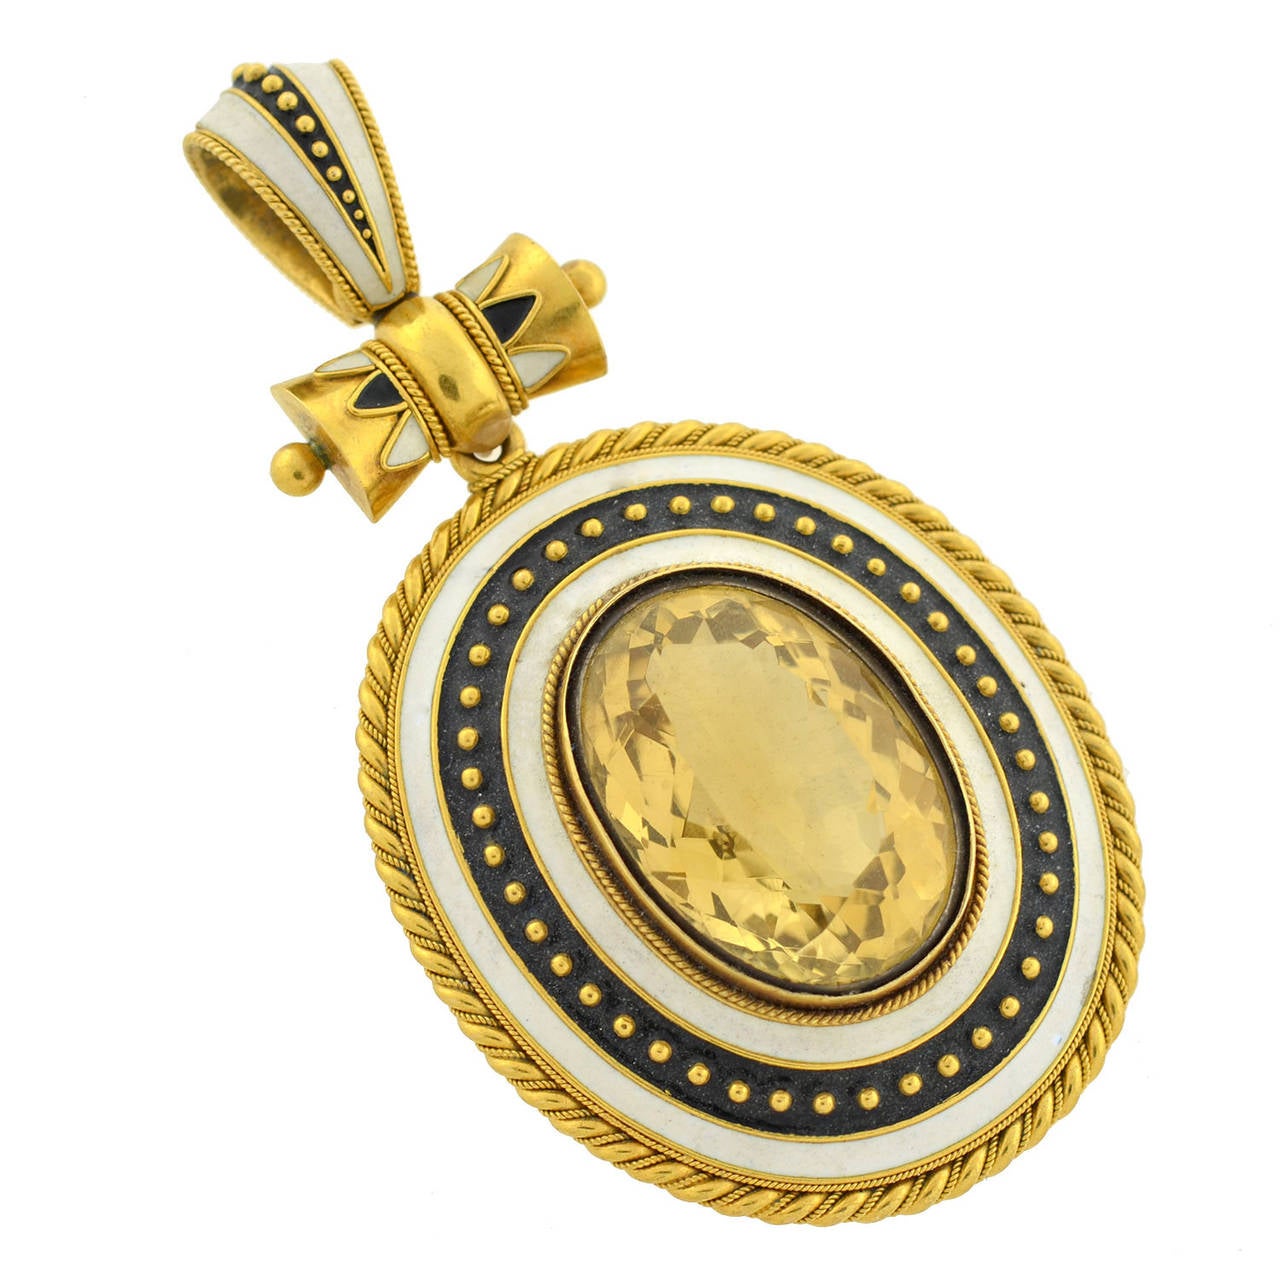 A magnificent citrine locket pendant from the Victorian (circa 1880) era! Made of vibrant 15kt yellow gold (indicating English origin), the piece is oval in shape and particularly large in size. A wonderful enameled border surrounds a faceted